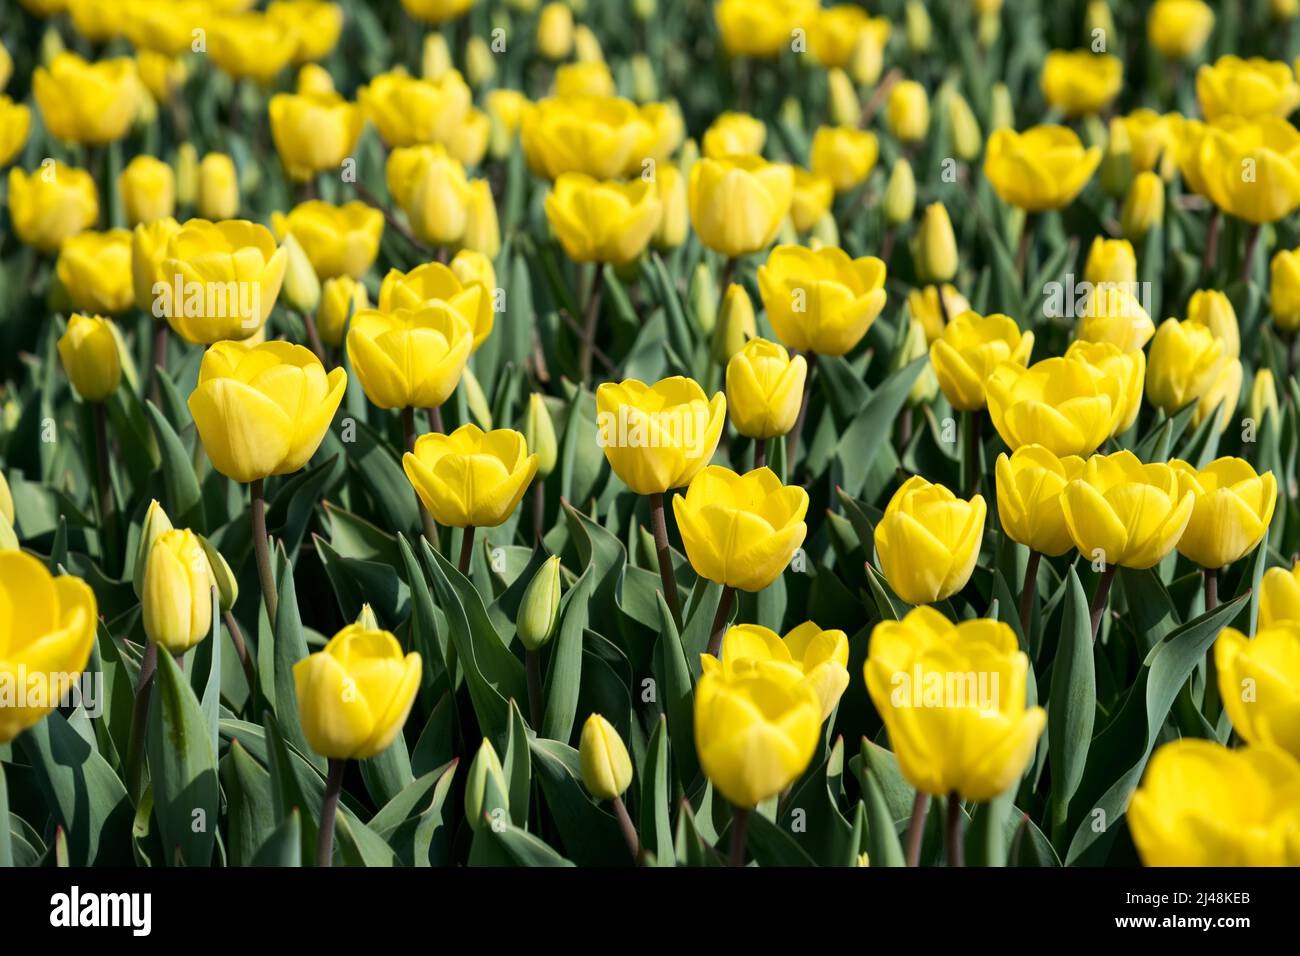 Background with abundance of bright lush tulips with yellow petals and green leaves growing in garden on sunny spring day Stock Photo